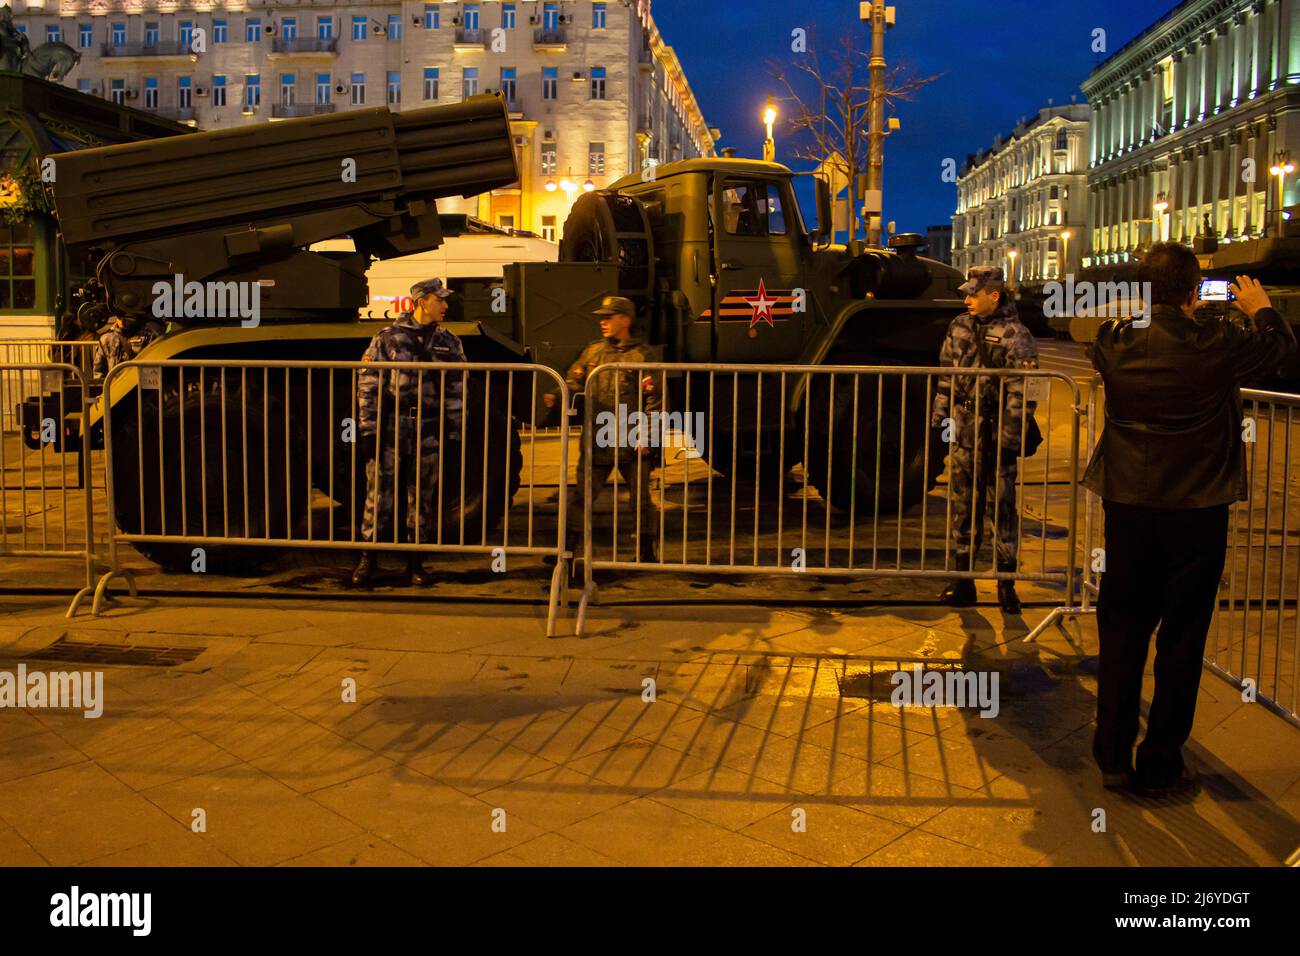 A rocket launcher vehicle is seen in Moscow. The final night rehearsal of the traditional Victory Day Parade is one of the main runs before the actual event scheduled for May 9. Besides its symbolic meaning, the yearly Victory Day Parade has been a tool to demonstrate Russia's new weaponry to potential adversaries. (Photo by Vlad Karkov / SOPA Images/Sipa USA) Stock Photo